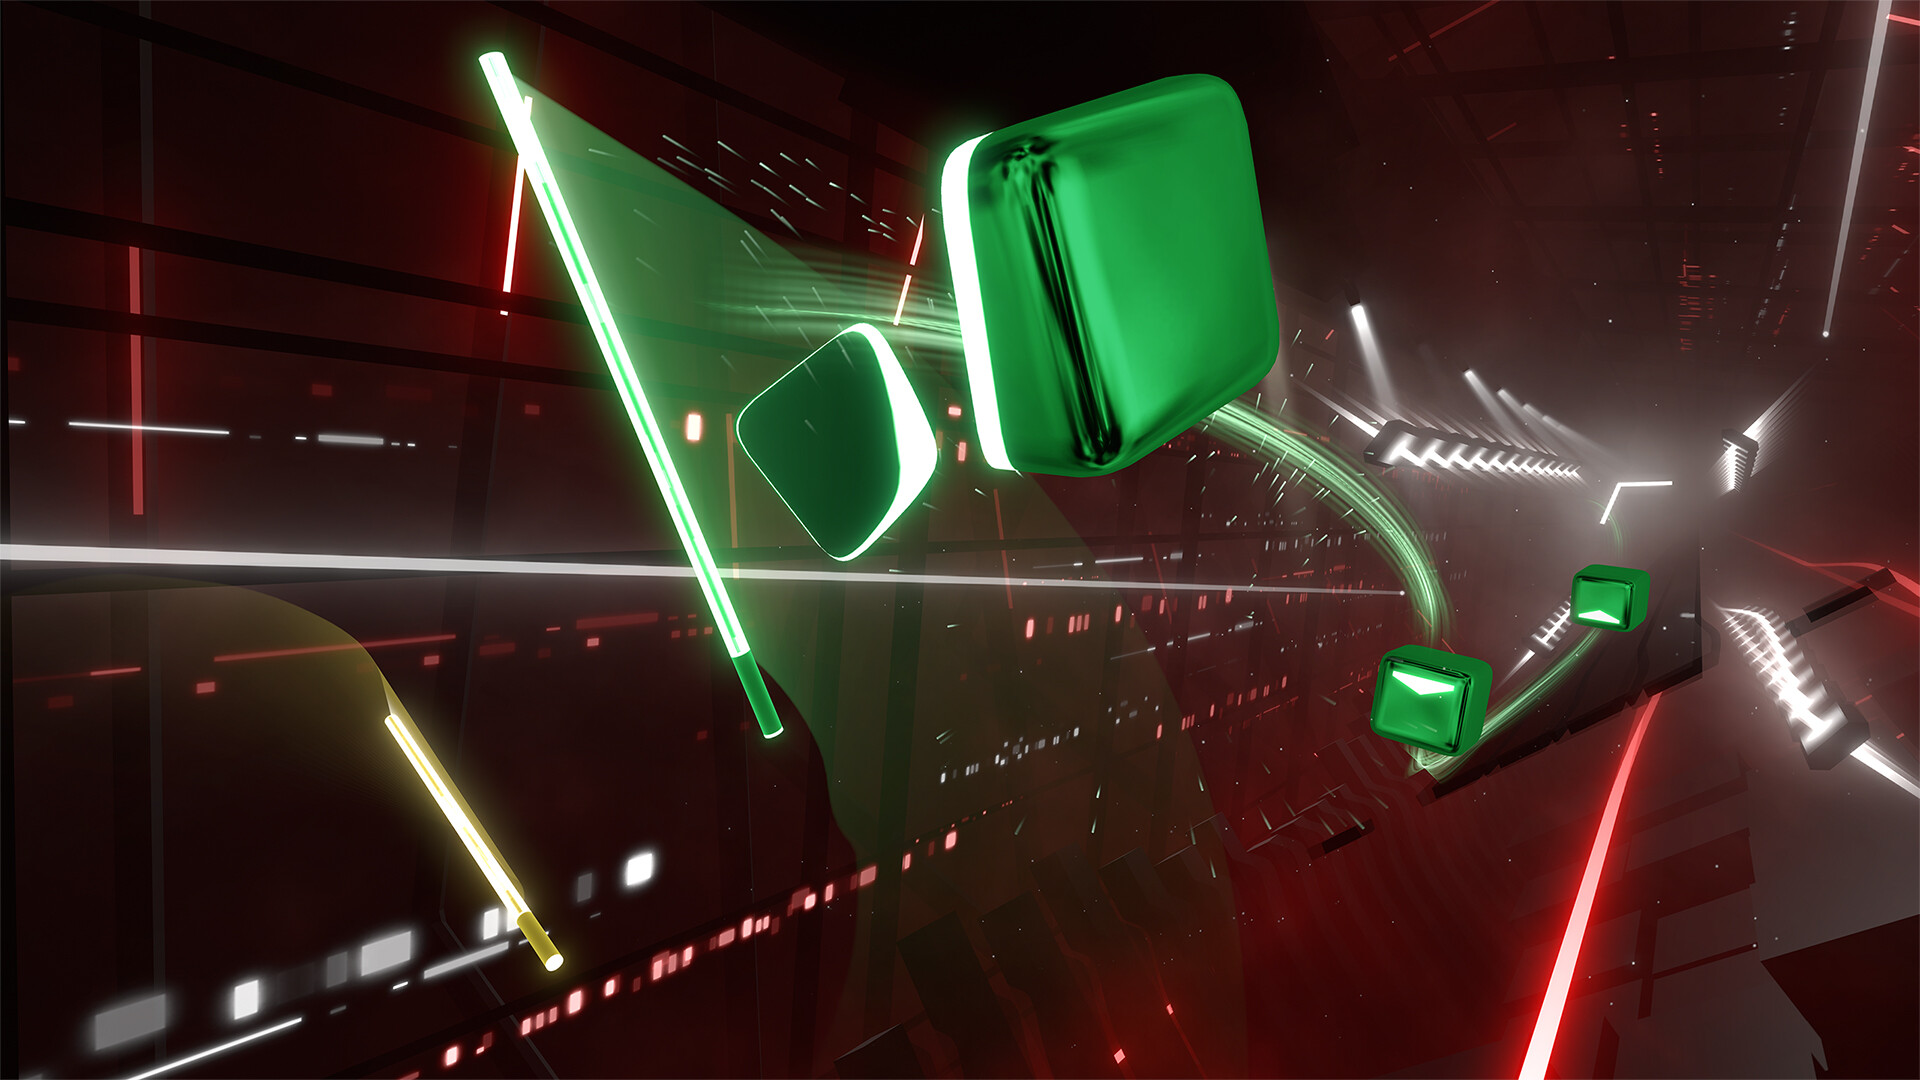 Beat Saber - Imagine Dragons - "Whatever It Takes" Featured Screenshot #1